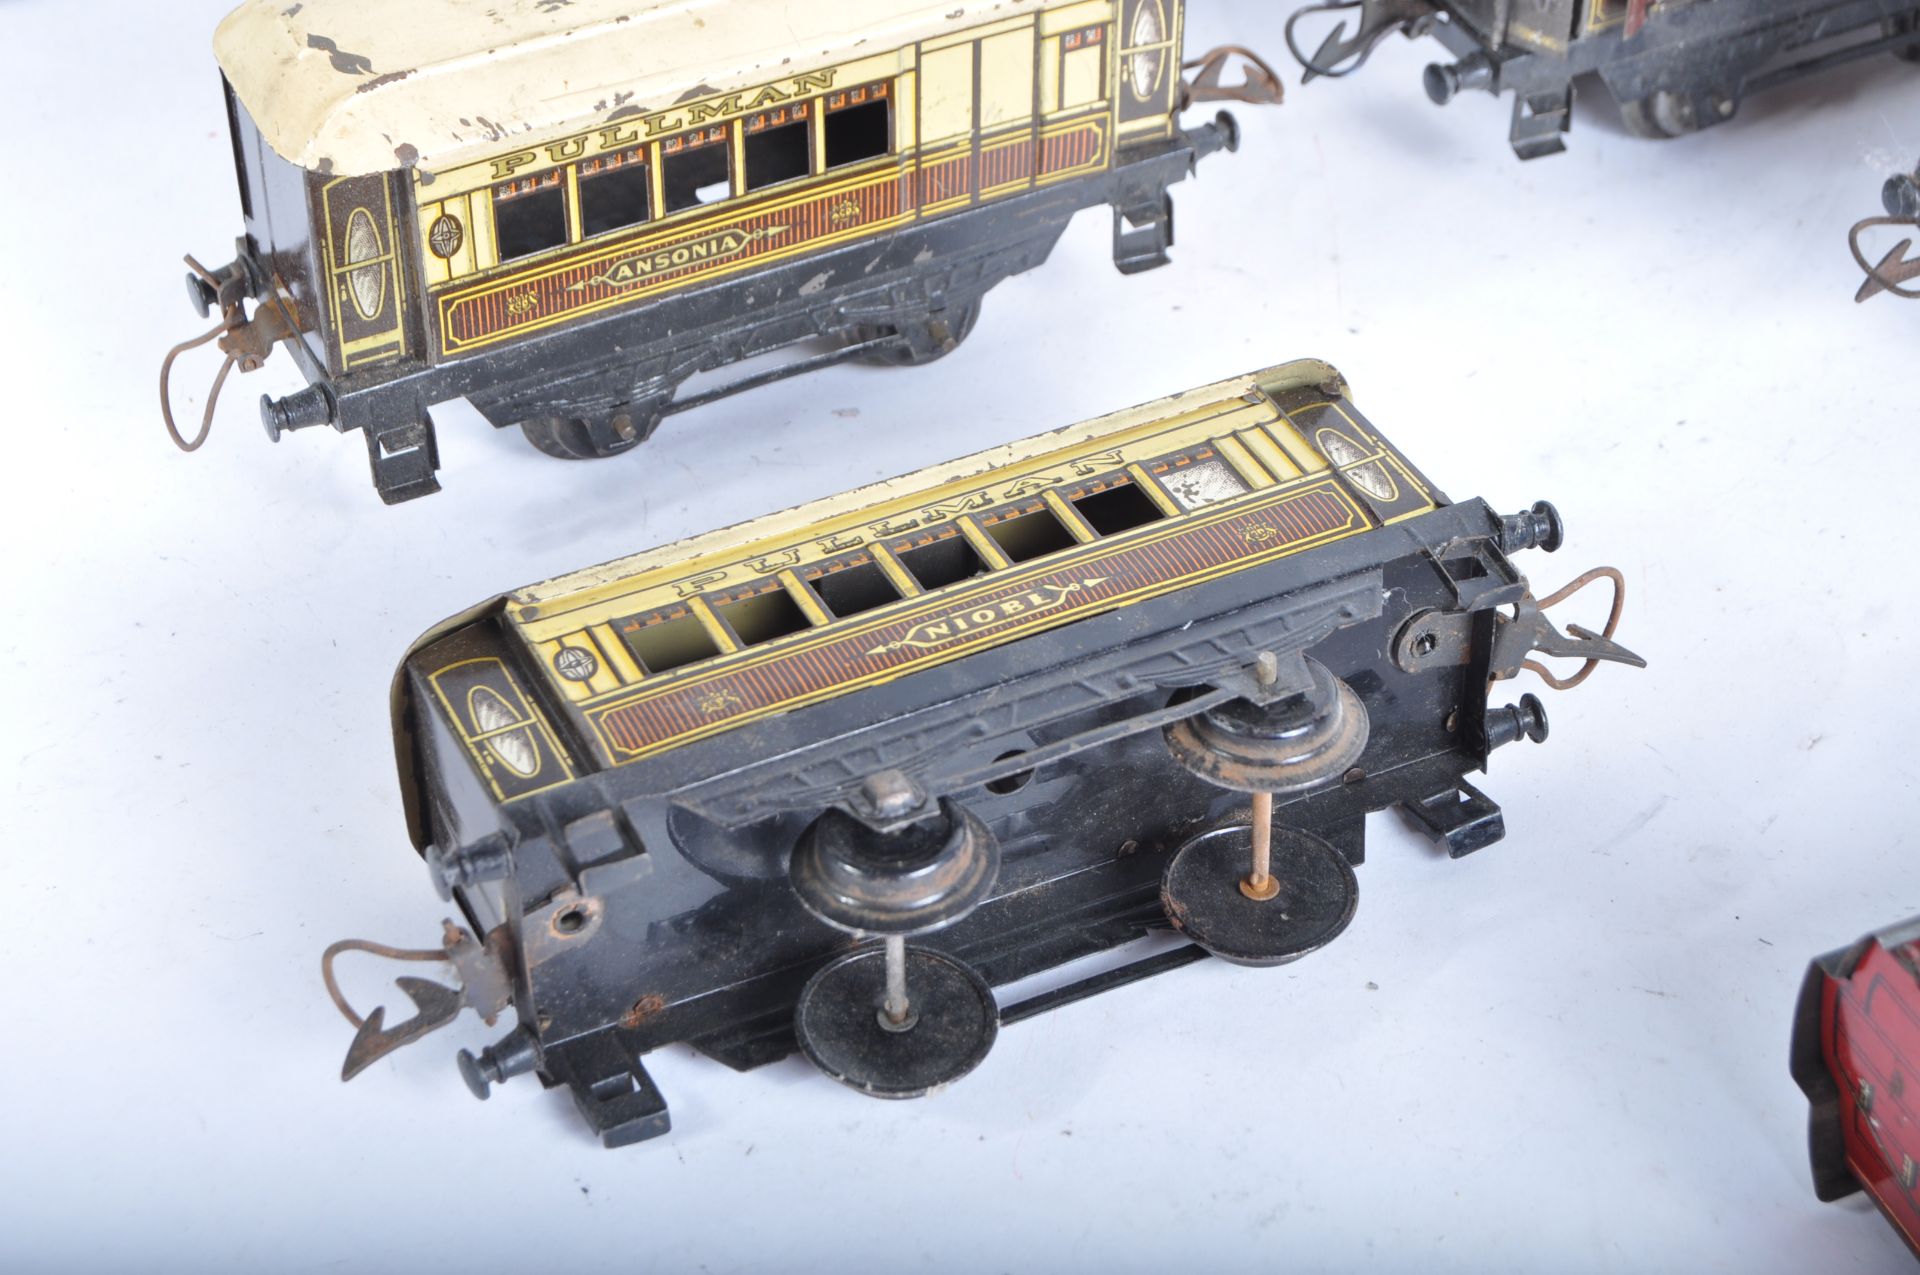 COLLECTION OF VINTAGE HORNBY O GAUGE TINPLATE RAILWAY CARRIAGES - Image 7 of 7